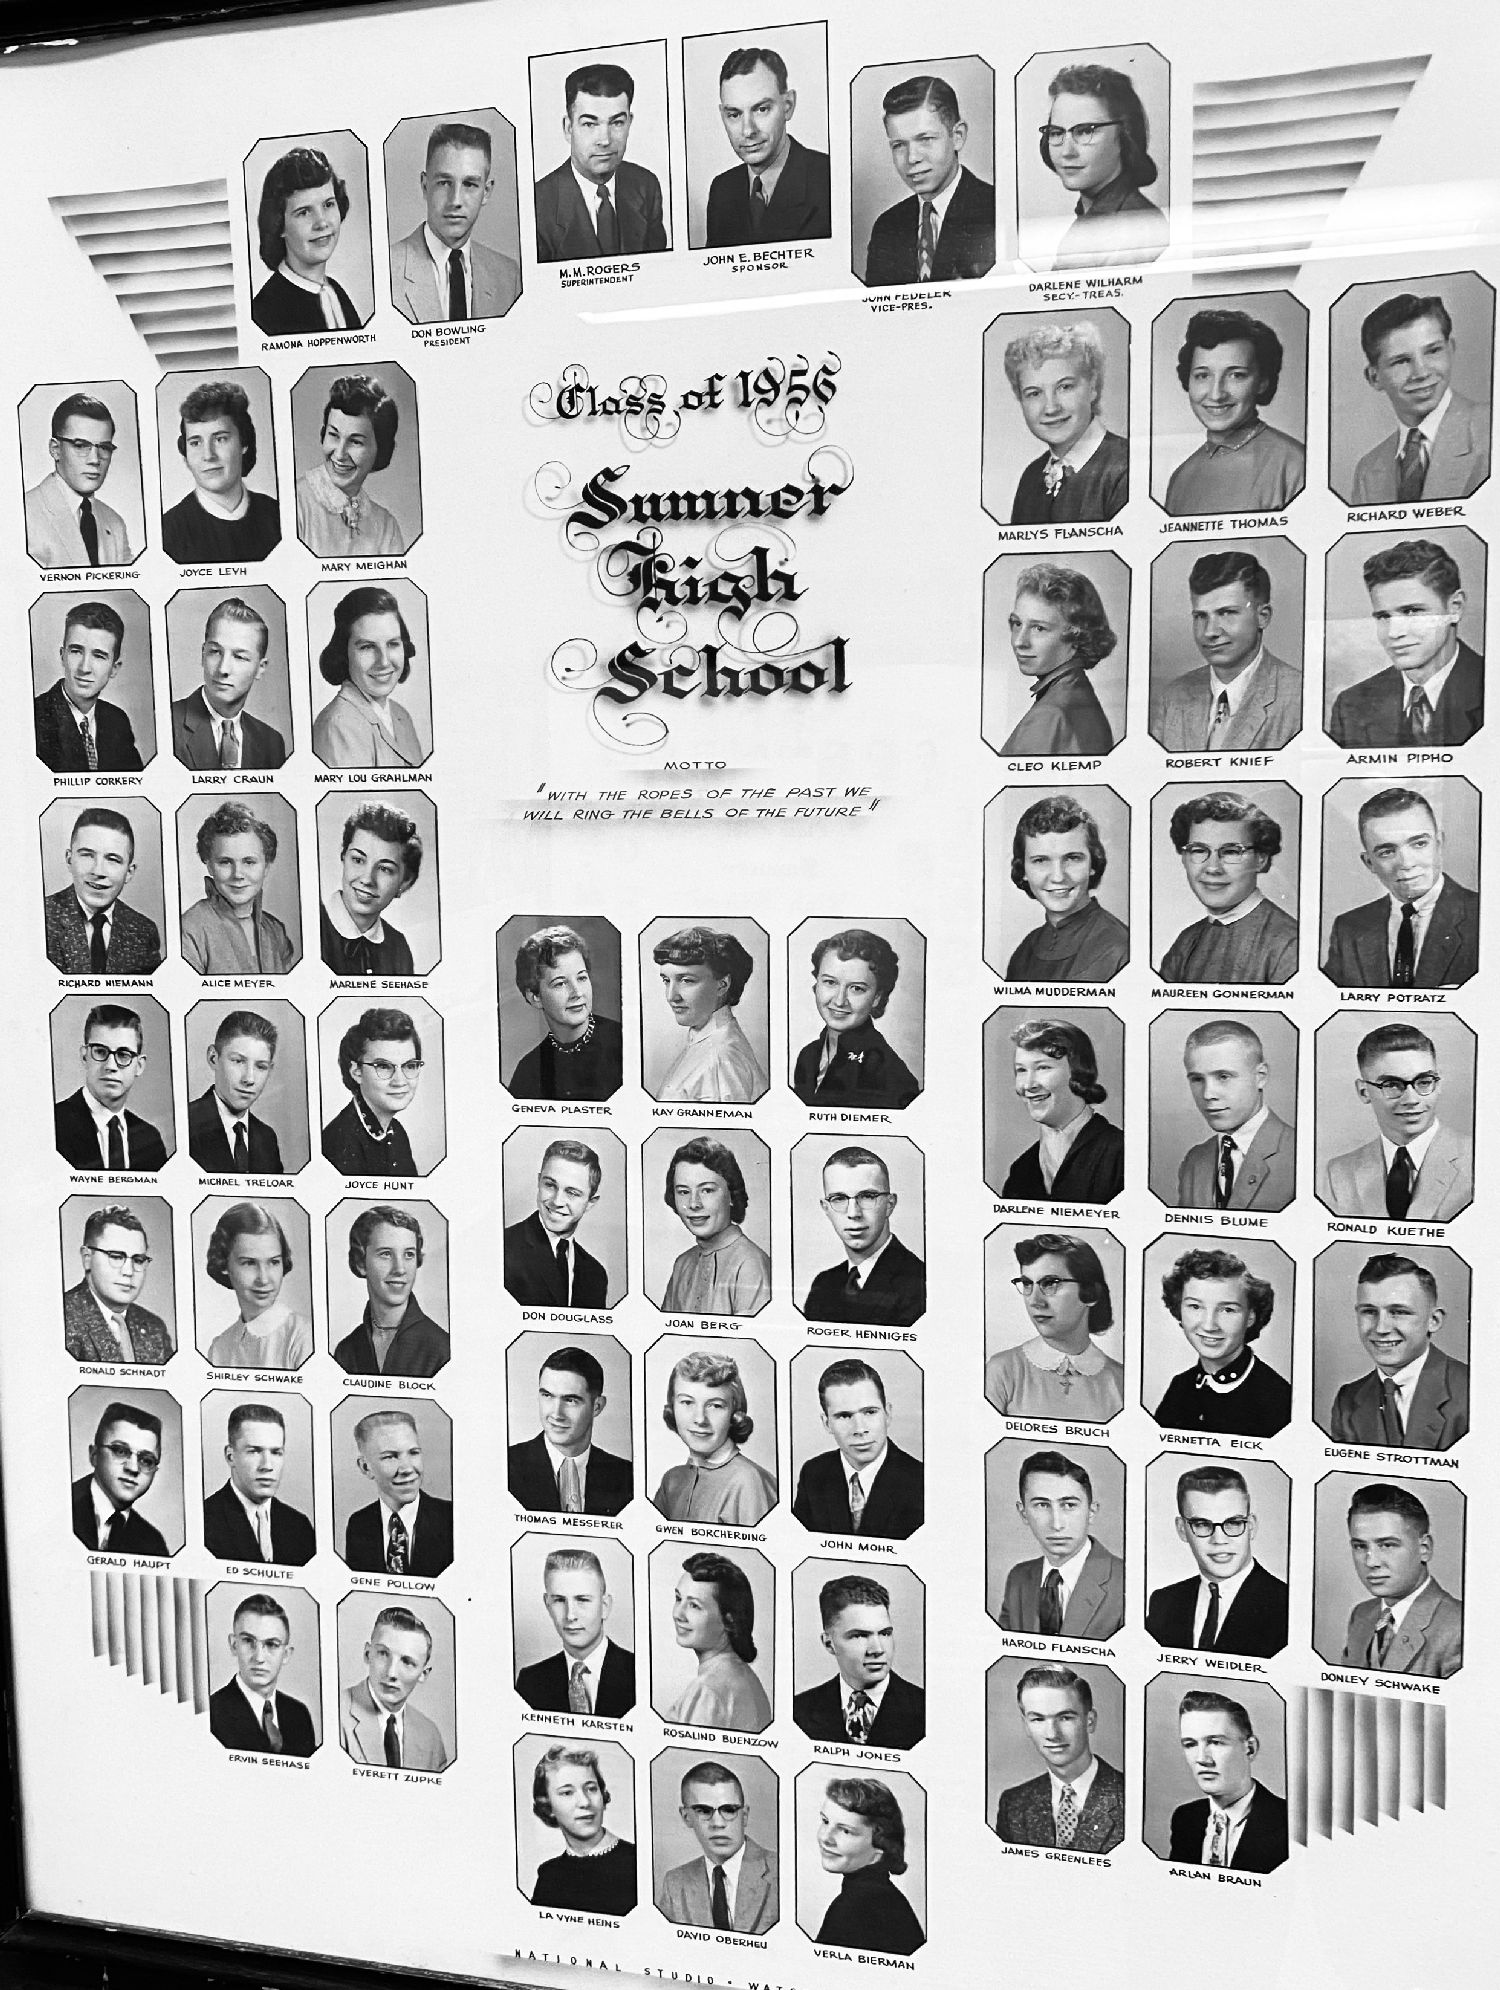 Sumner Memories Are Forever - Class of 1956